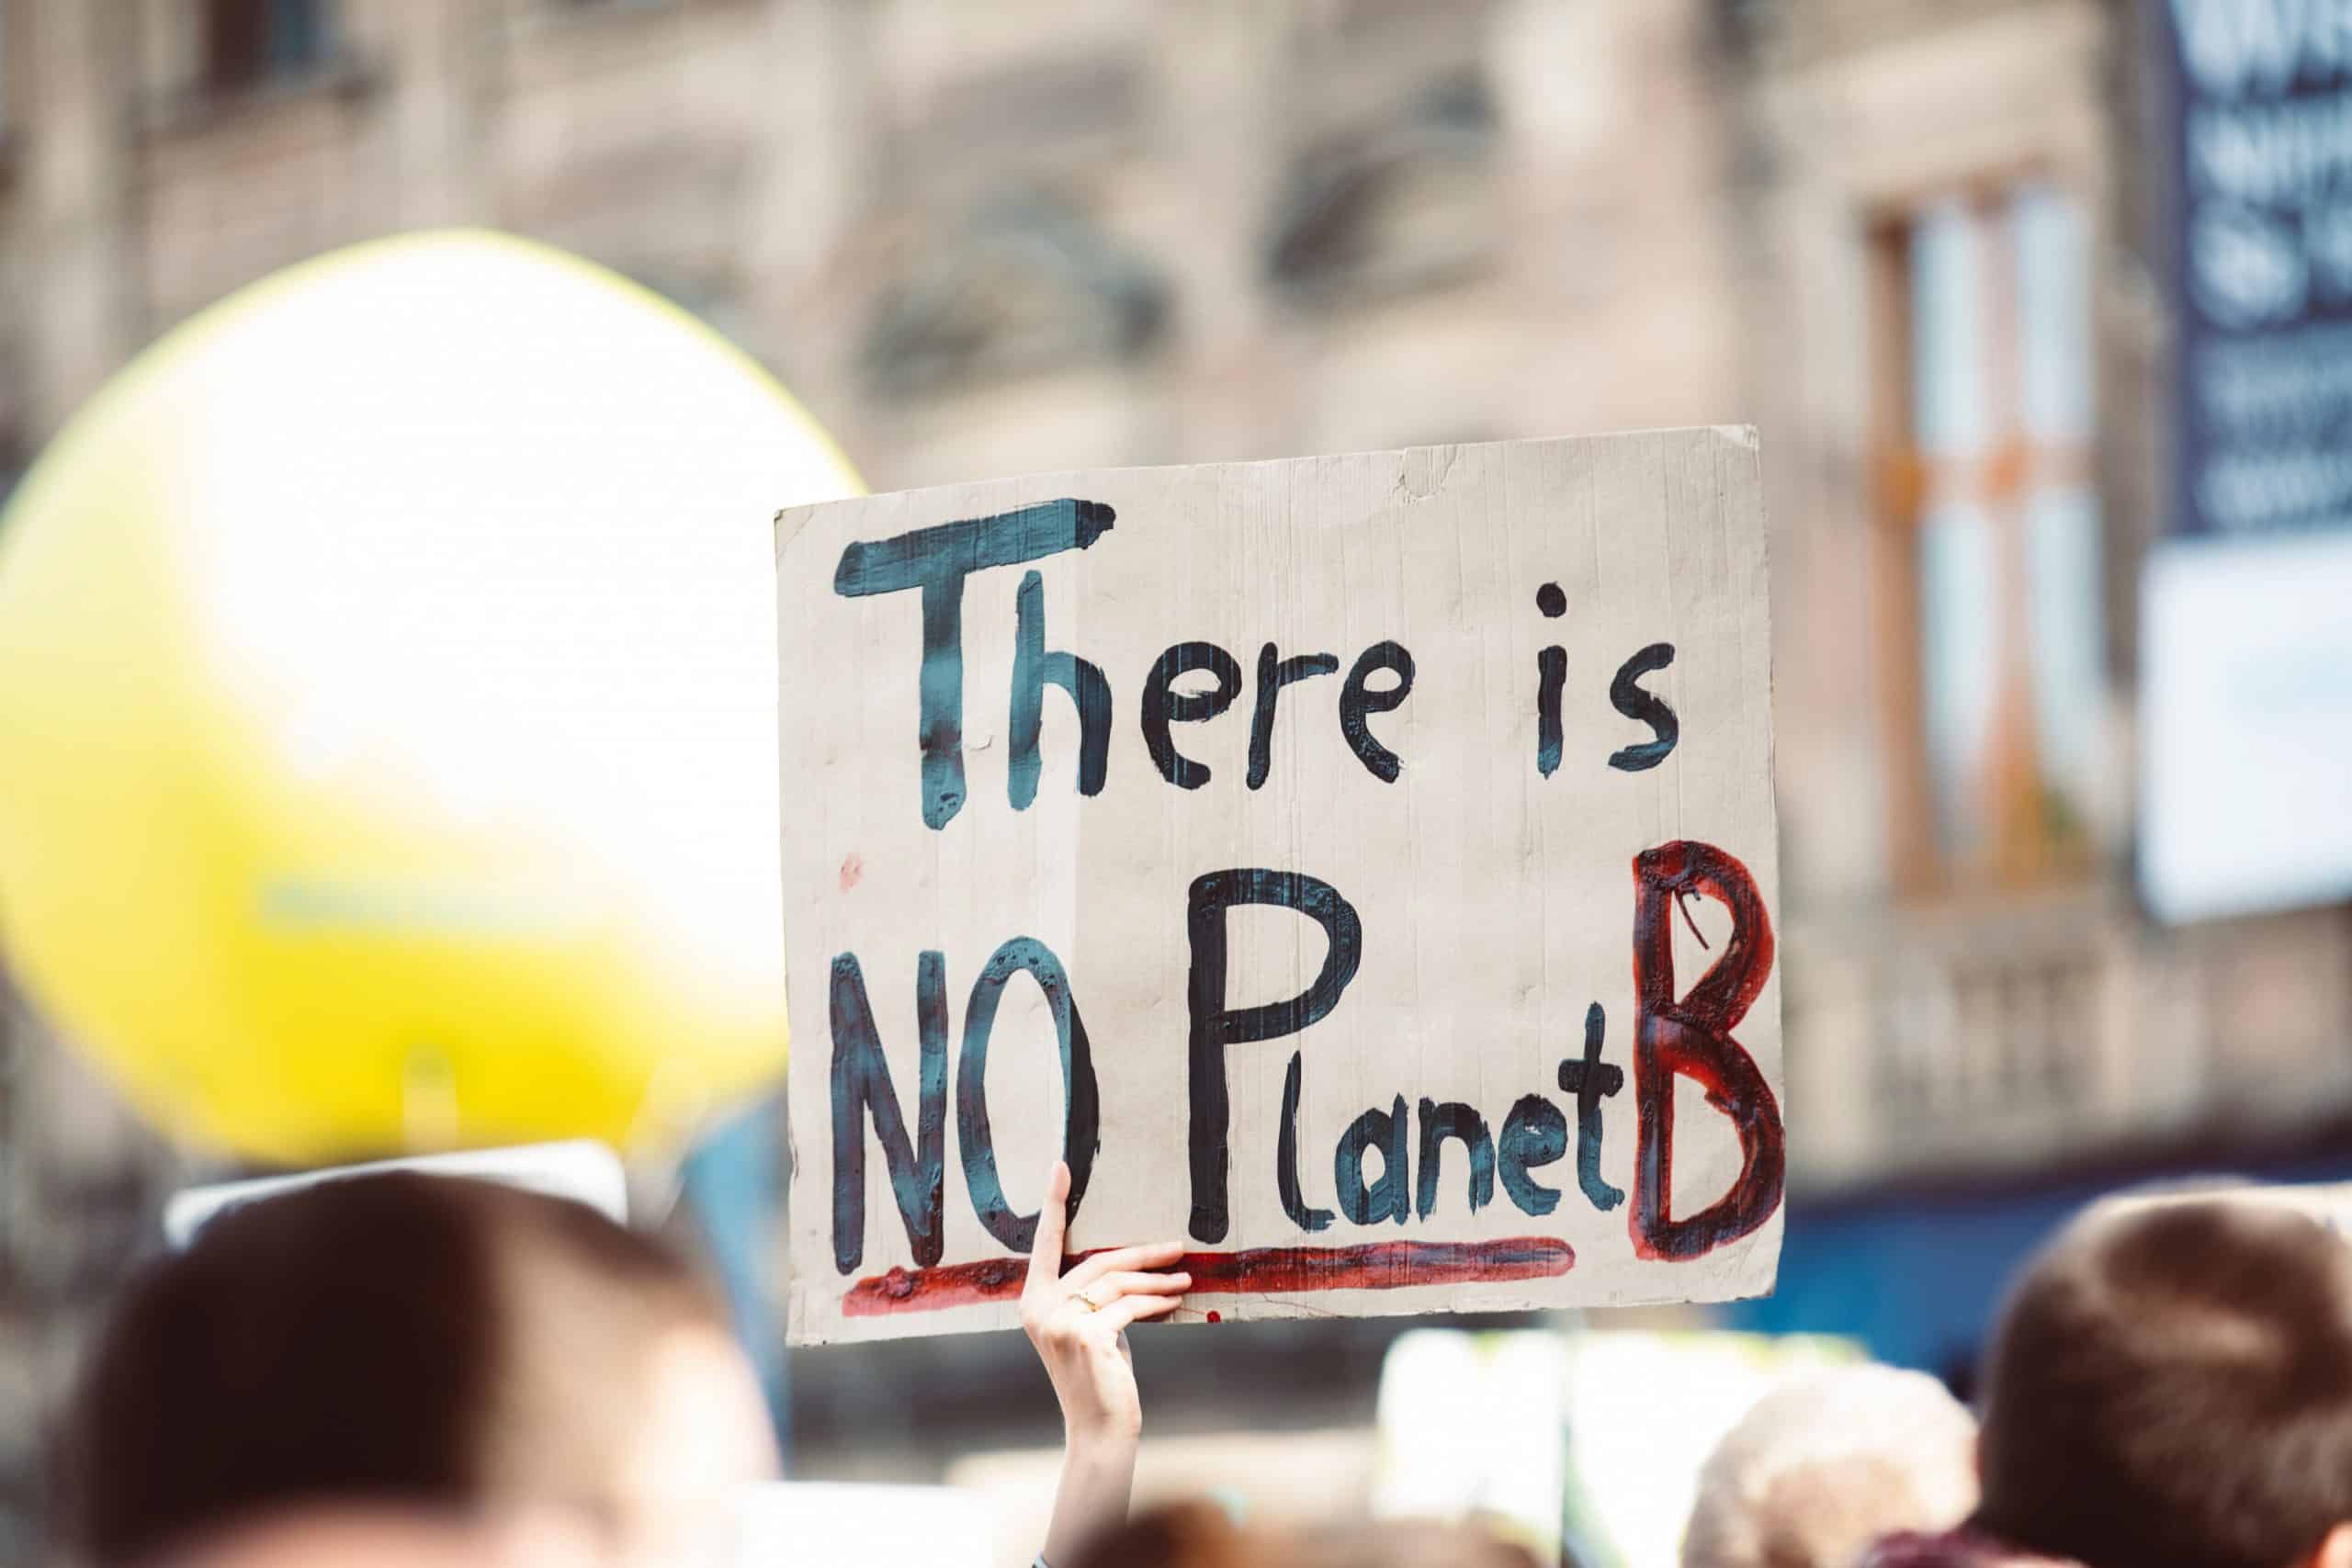 Climate crisis activism, anxiety, and active hope